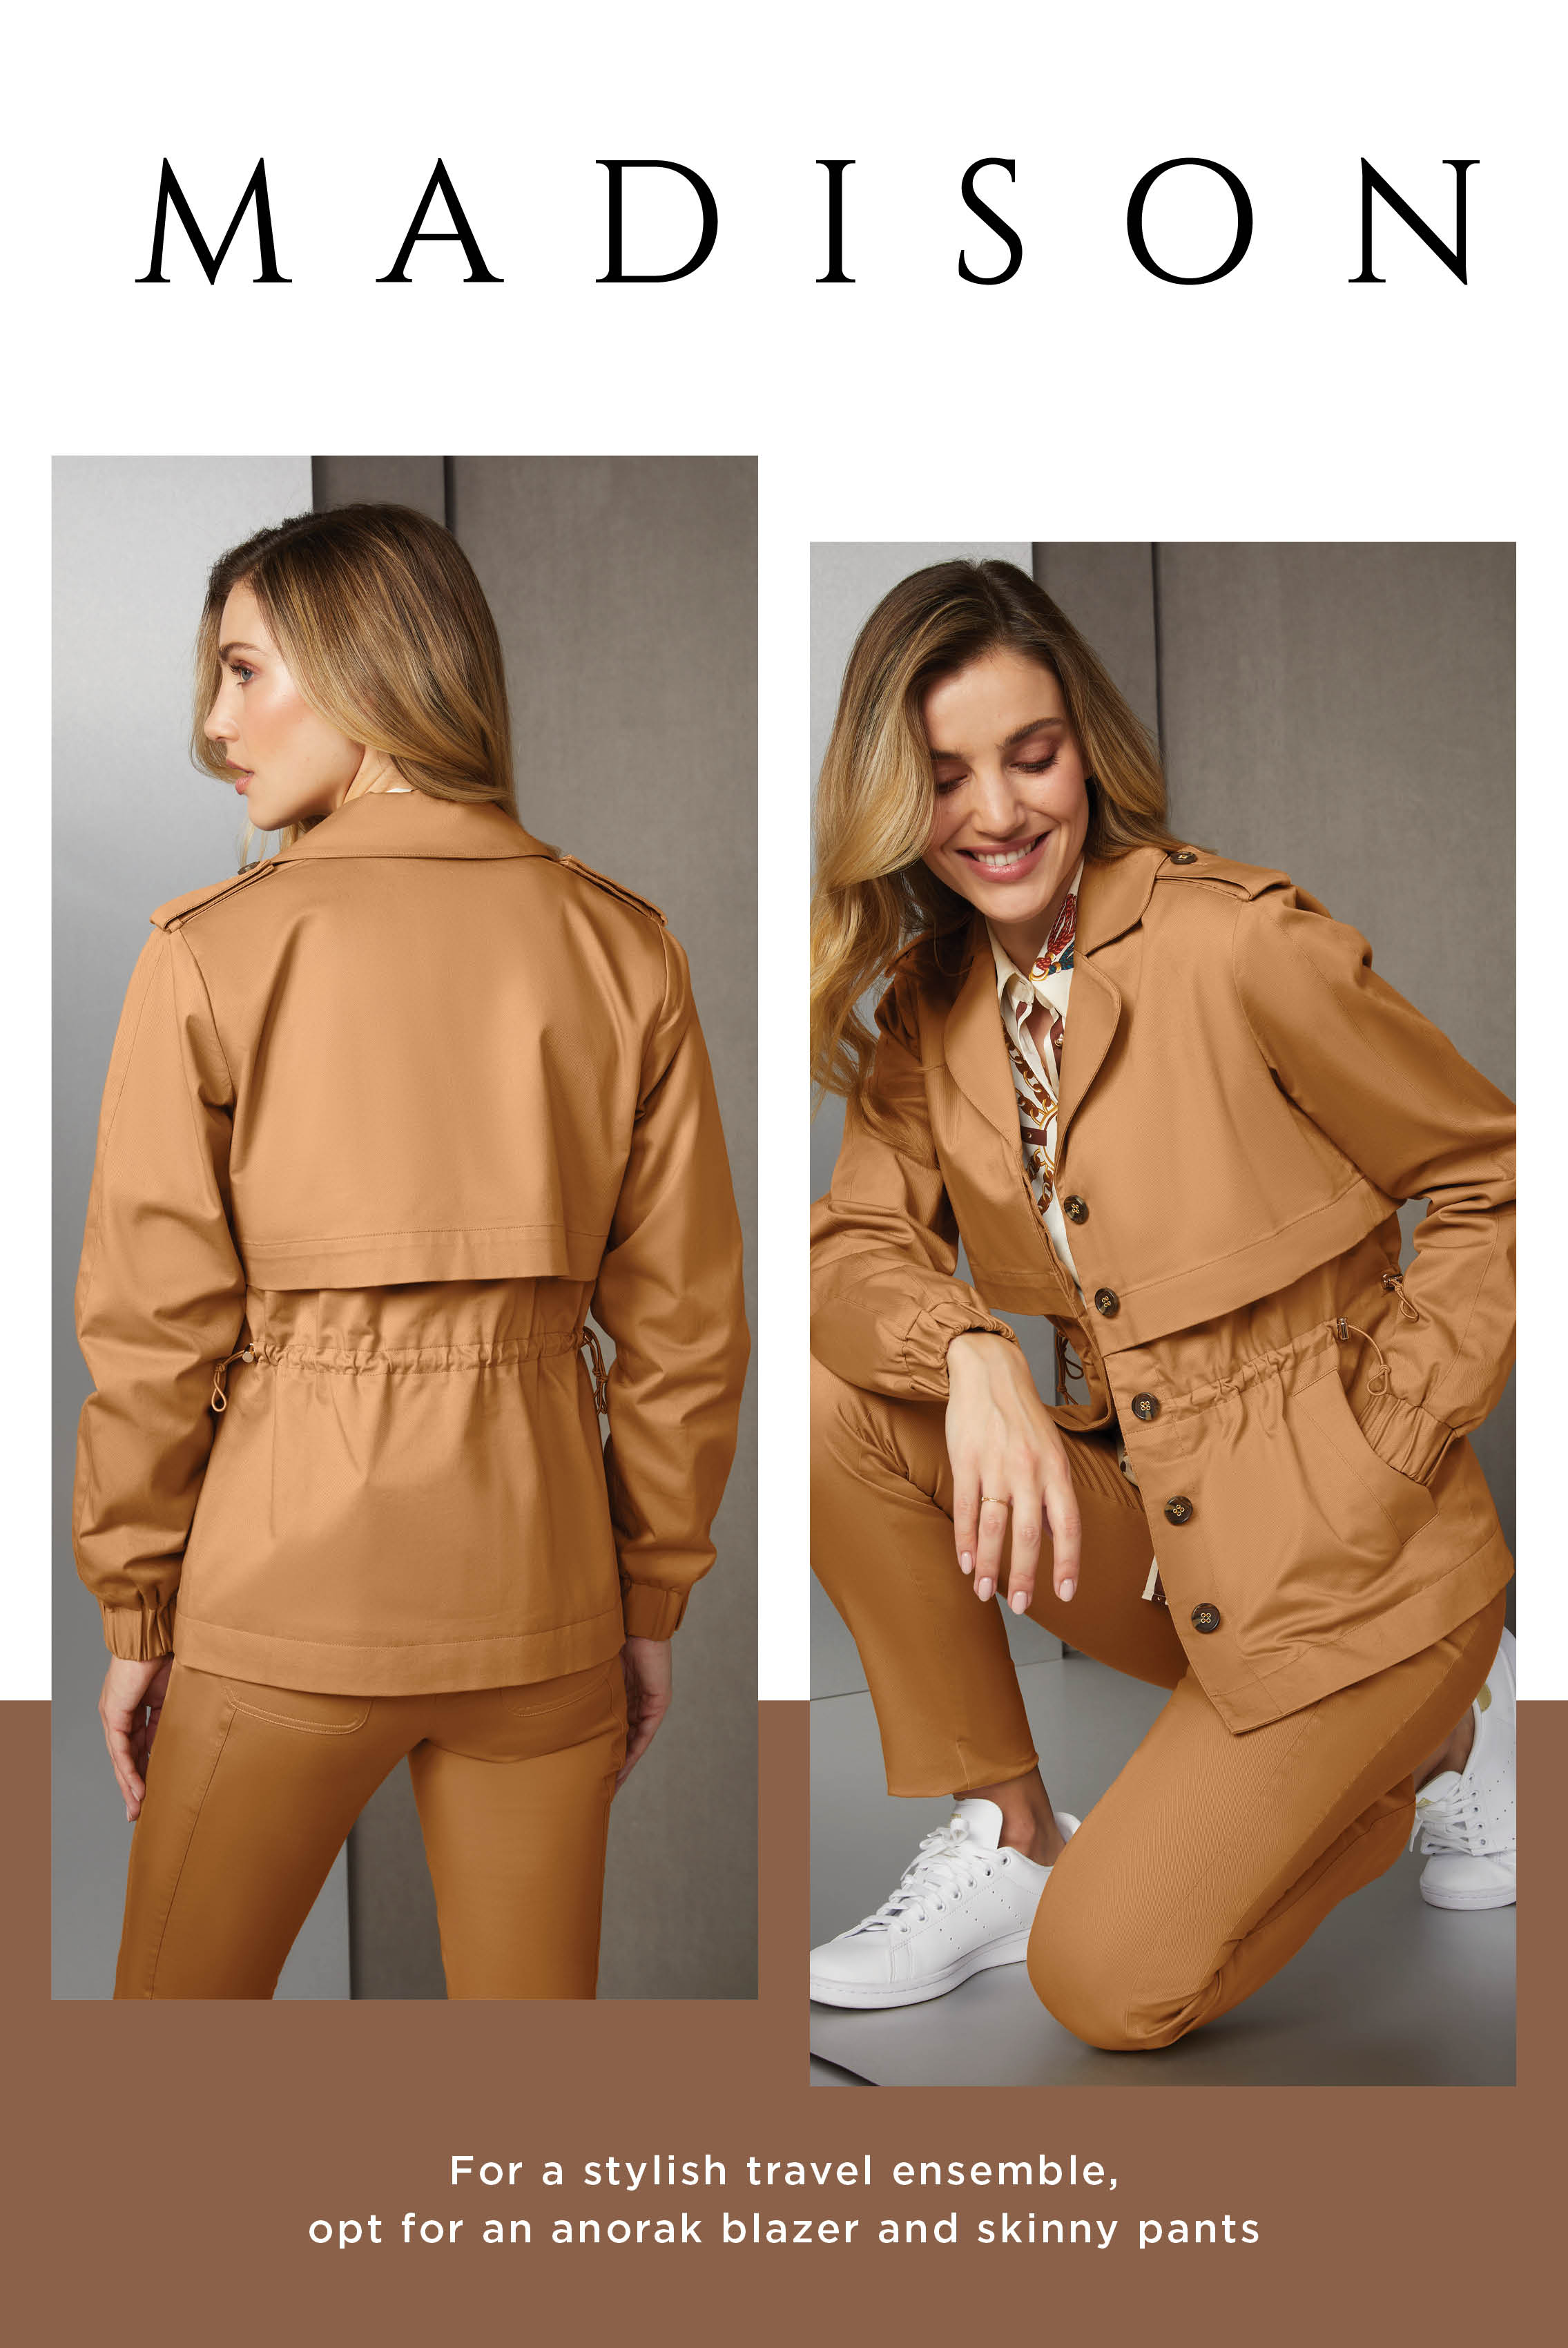 For a stylish travel ensemble, opt for an anorak blazer and skinny pants. Crafted in warm camel Japanese twill, the look ensures comfort and warmth for your journey. Accent them with a print tapioca satin equestrian blouse...